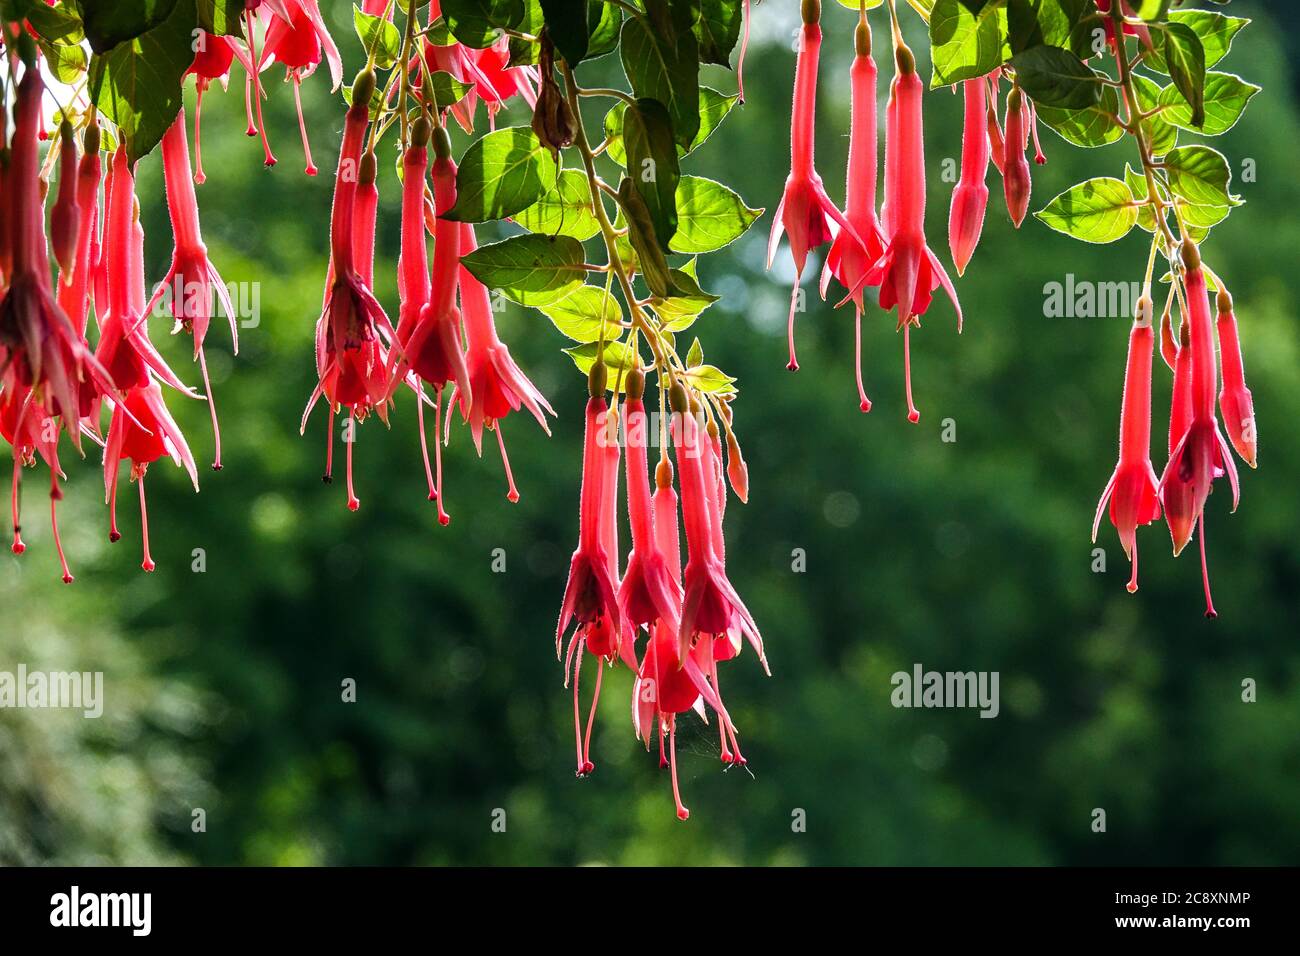 Red trumpet flowers Fuchsia 'Trumpeter' hanging plant Red tubular flowers Stock Photo